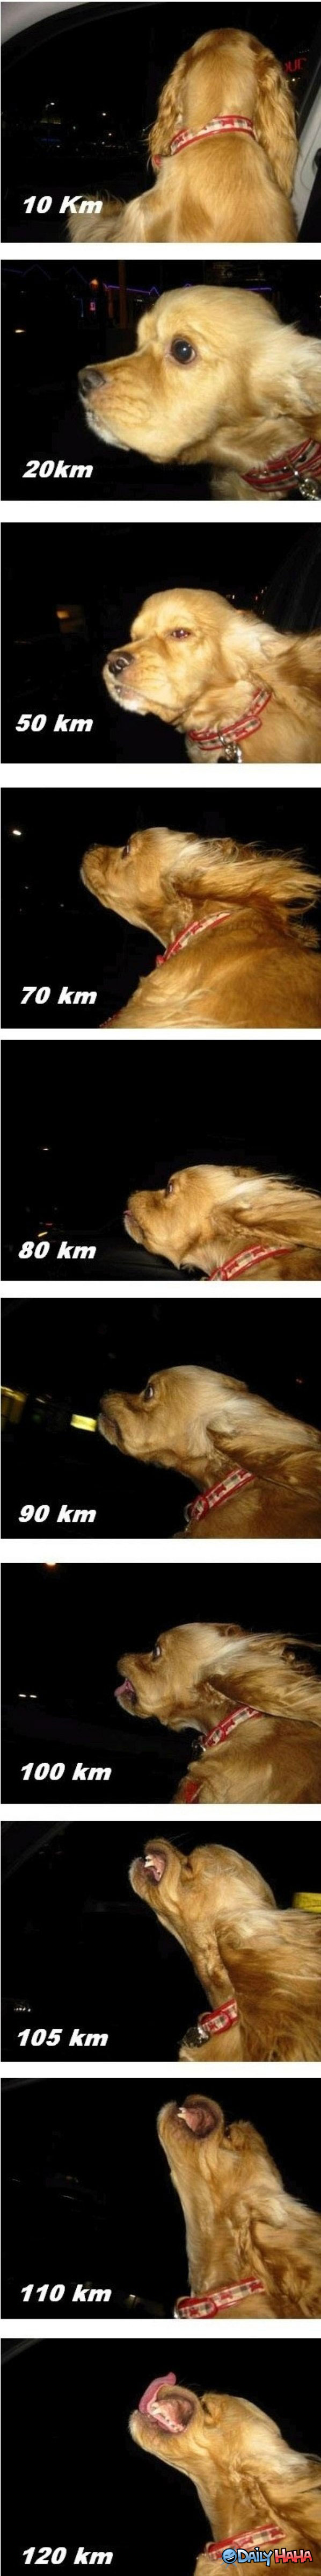 what happens to a dog with his headout the window at different speeds